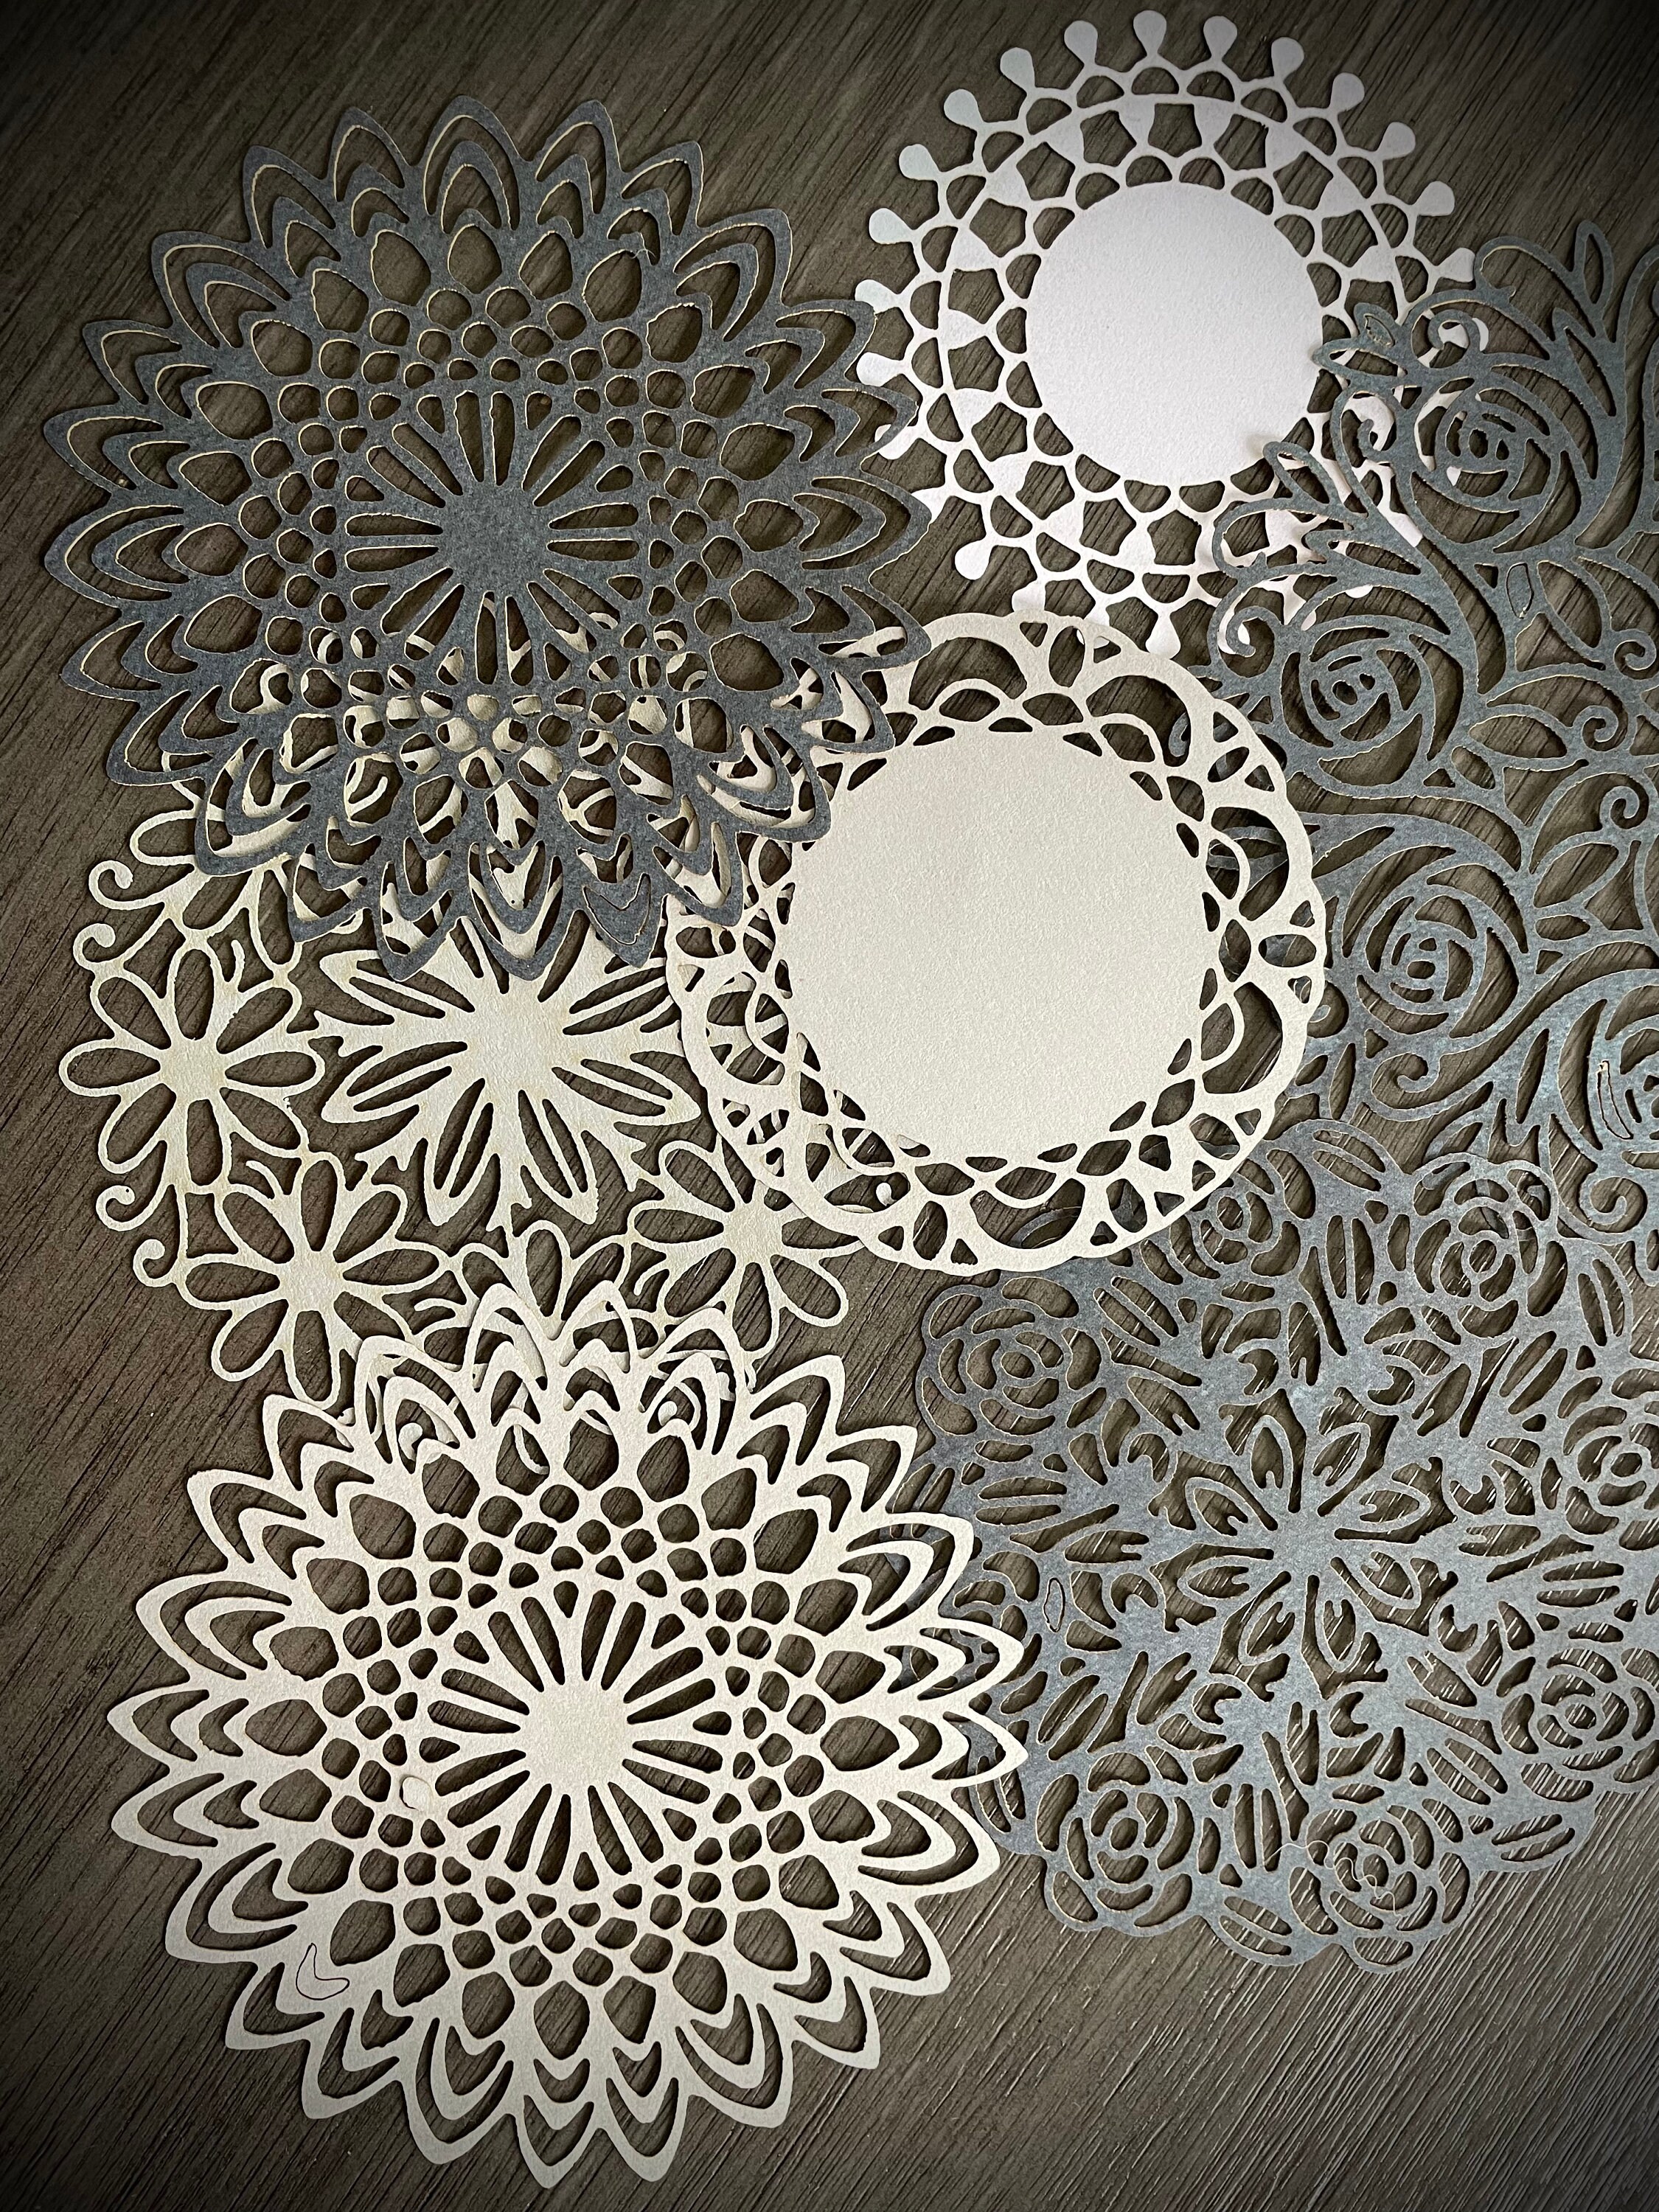 3 in 1 Triple Layer Snowflake/Doily Paper Punch retired Stampin Up